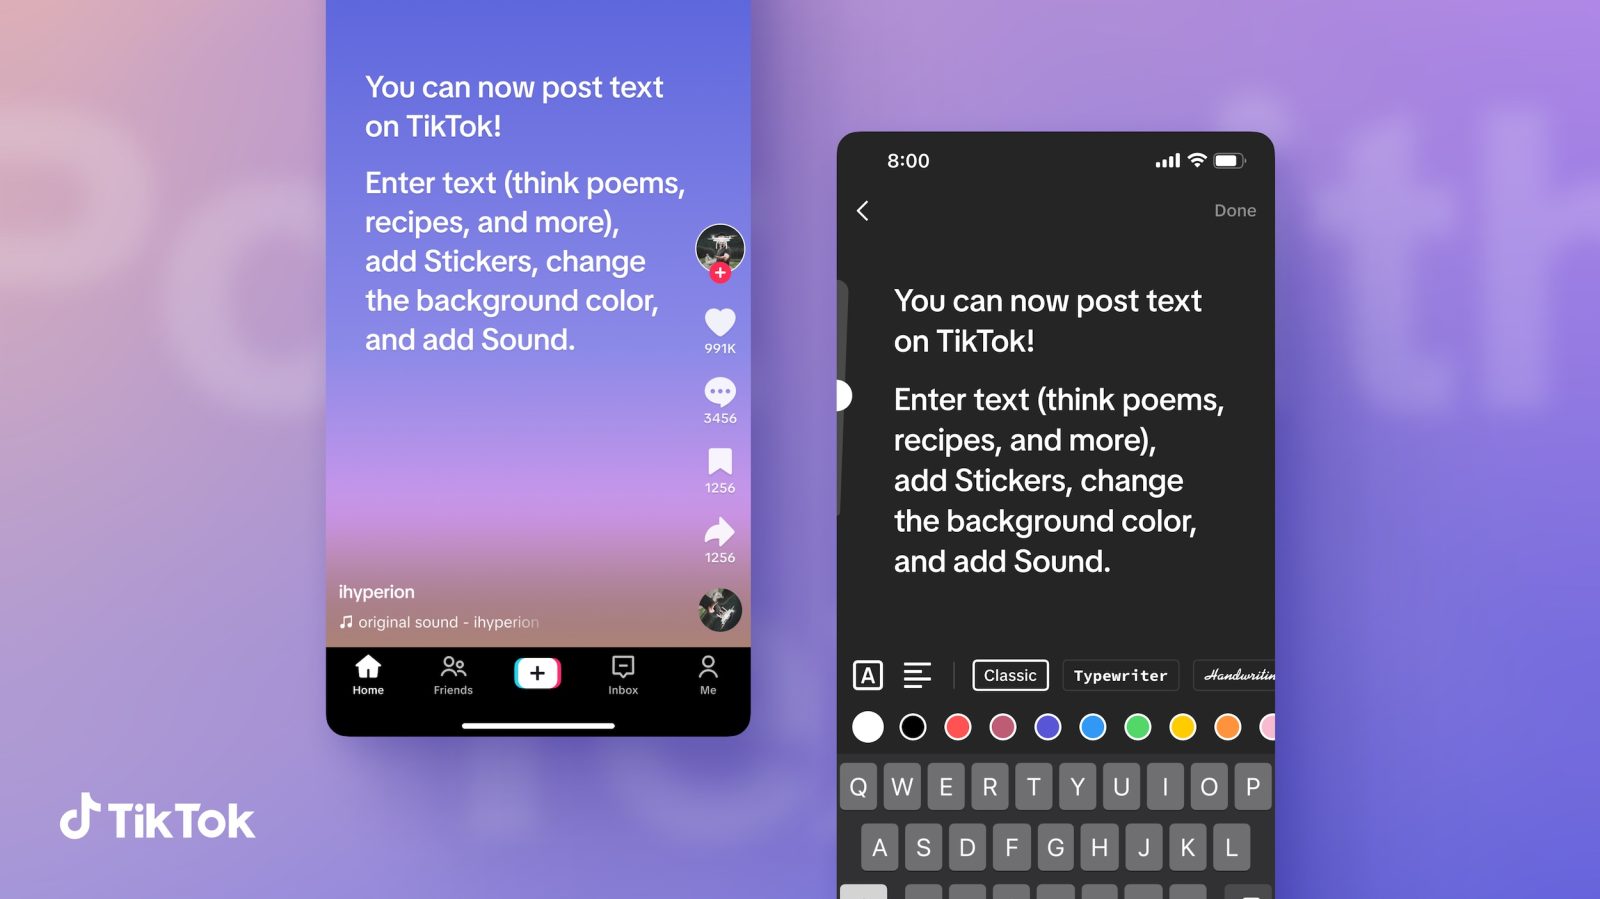 TikTok now lets users share texts with others